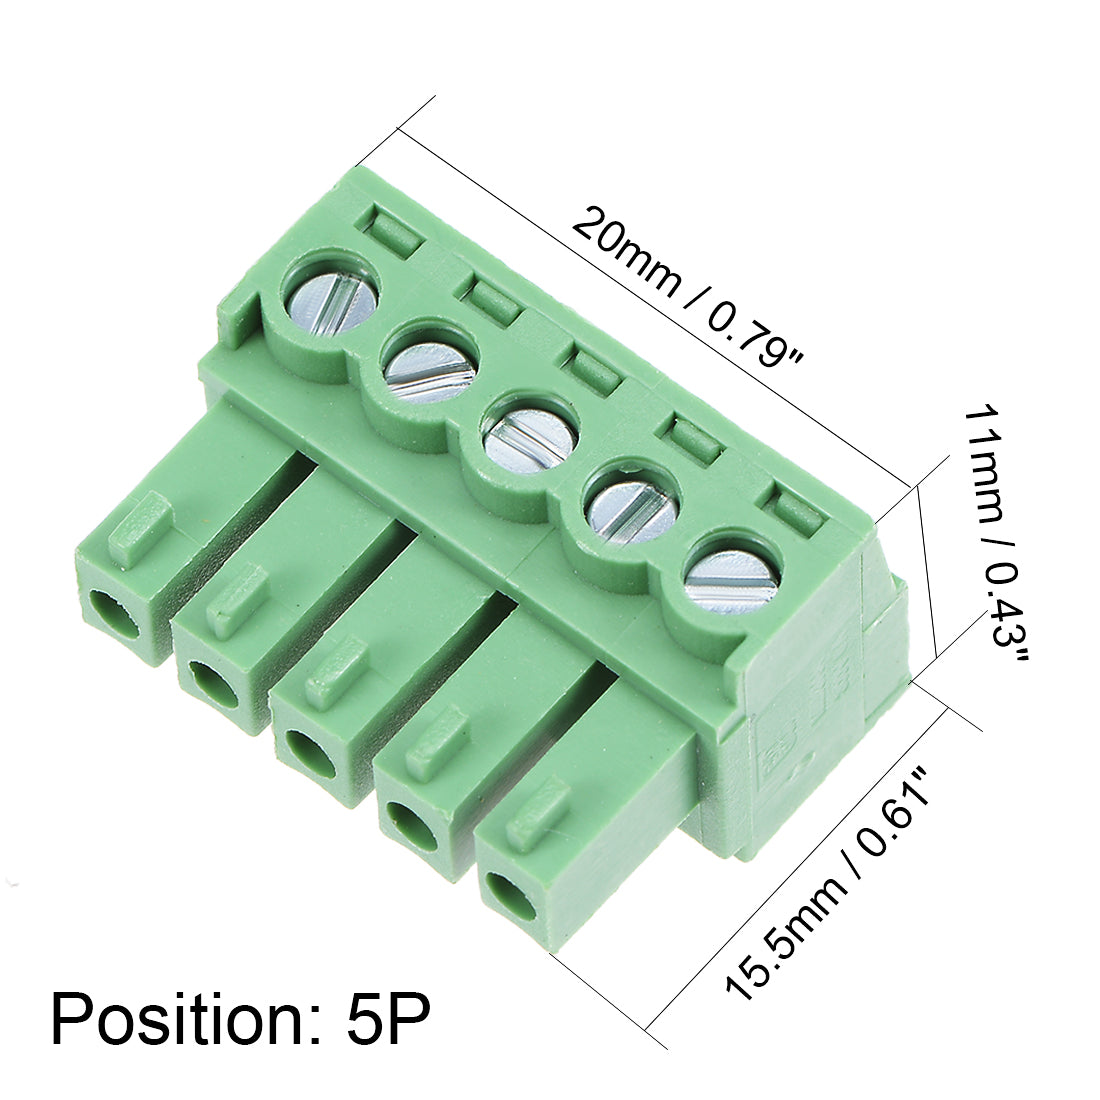 uxcell Uxcell 4Pcs AC300V 8A 3.81mm Pitch 5P Flat Angle Needle Seat Insert-In PCB Terminal Block Connector green